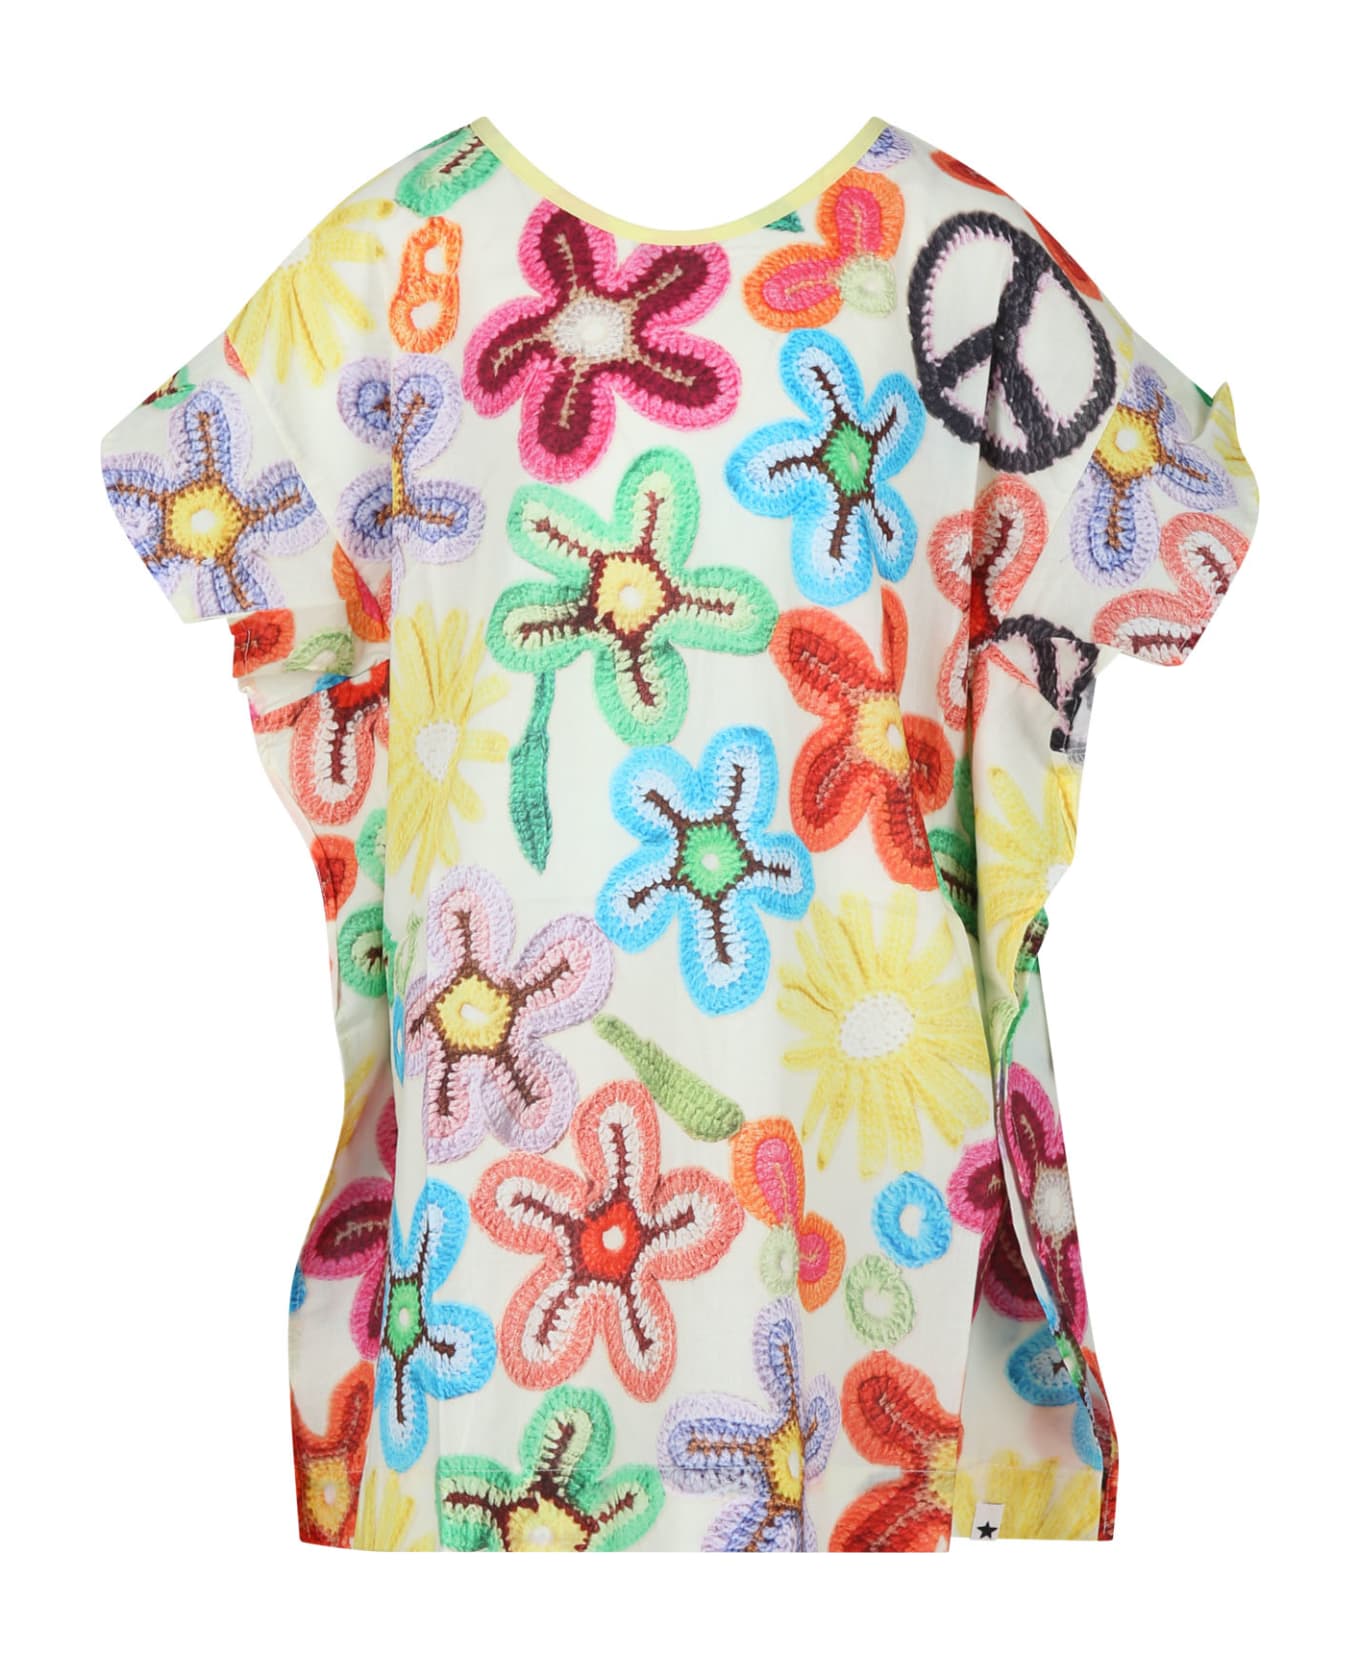 Molo Yellow Swimsuit Cover-up For Girl With Flowers Print - Multicolor